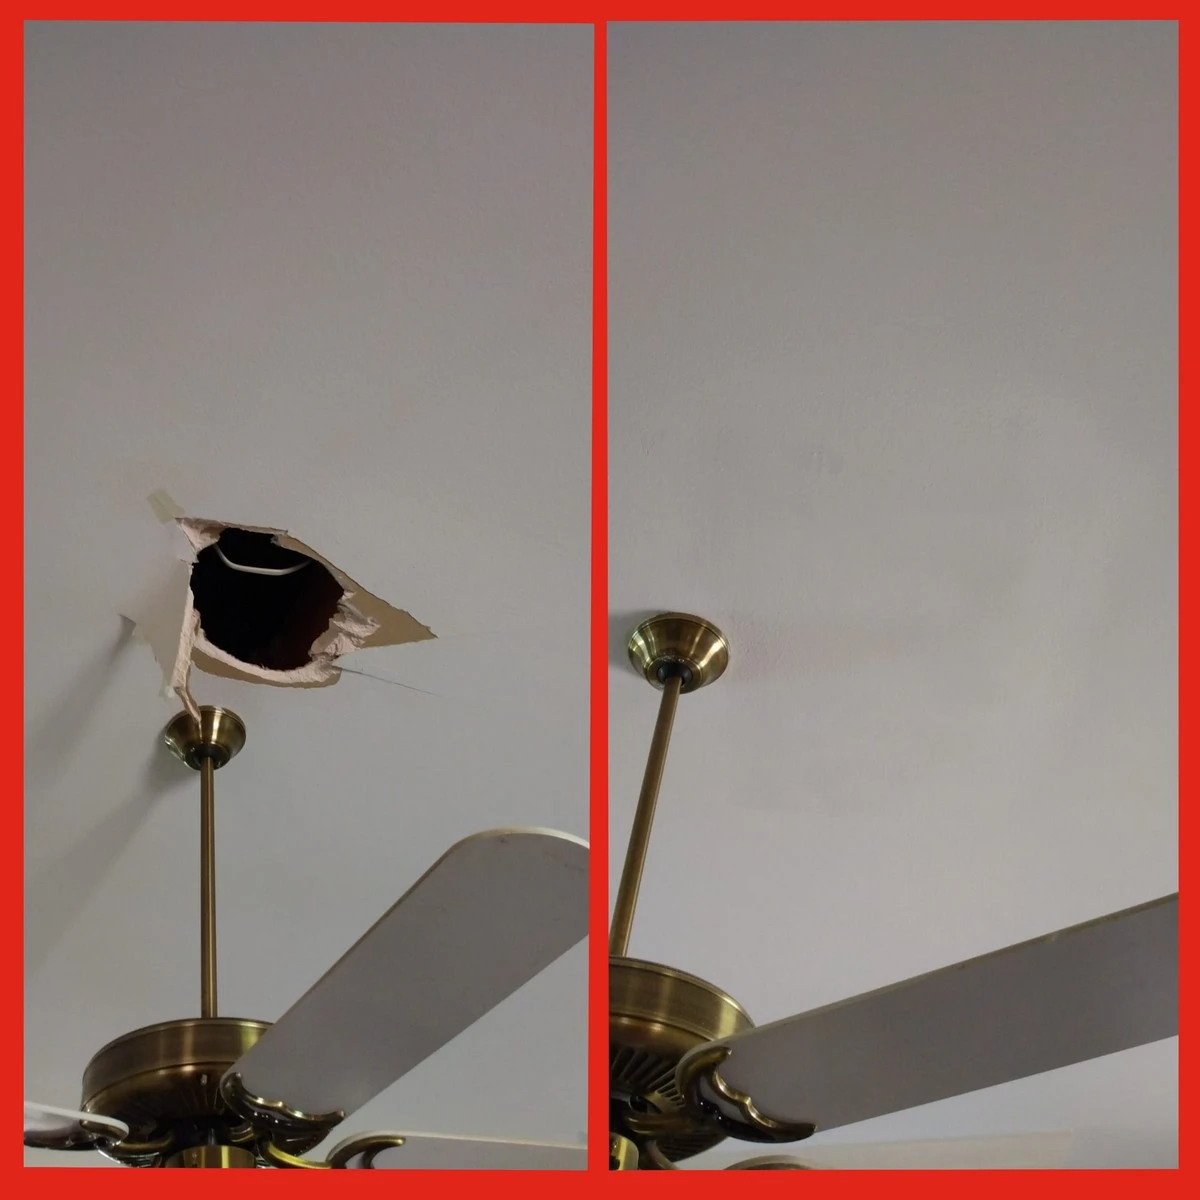 A section of a ceiling above a ceiling fan with a large hole and the same ceiling after Mr. Handyman has repaired the hole with services for drywall repair in Crowley, TX.